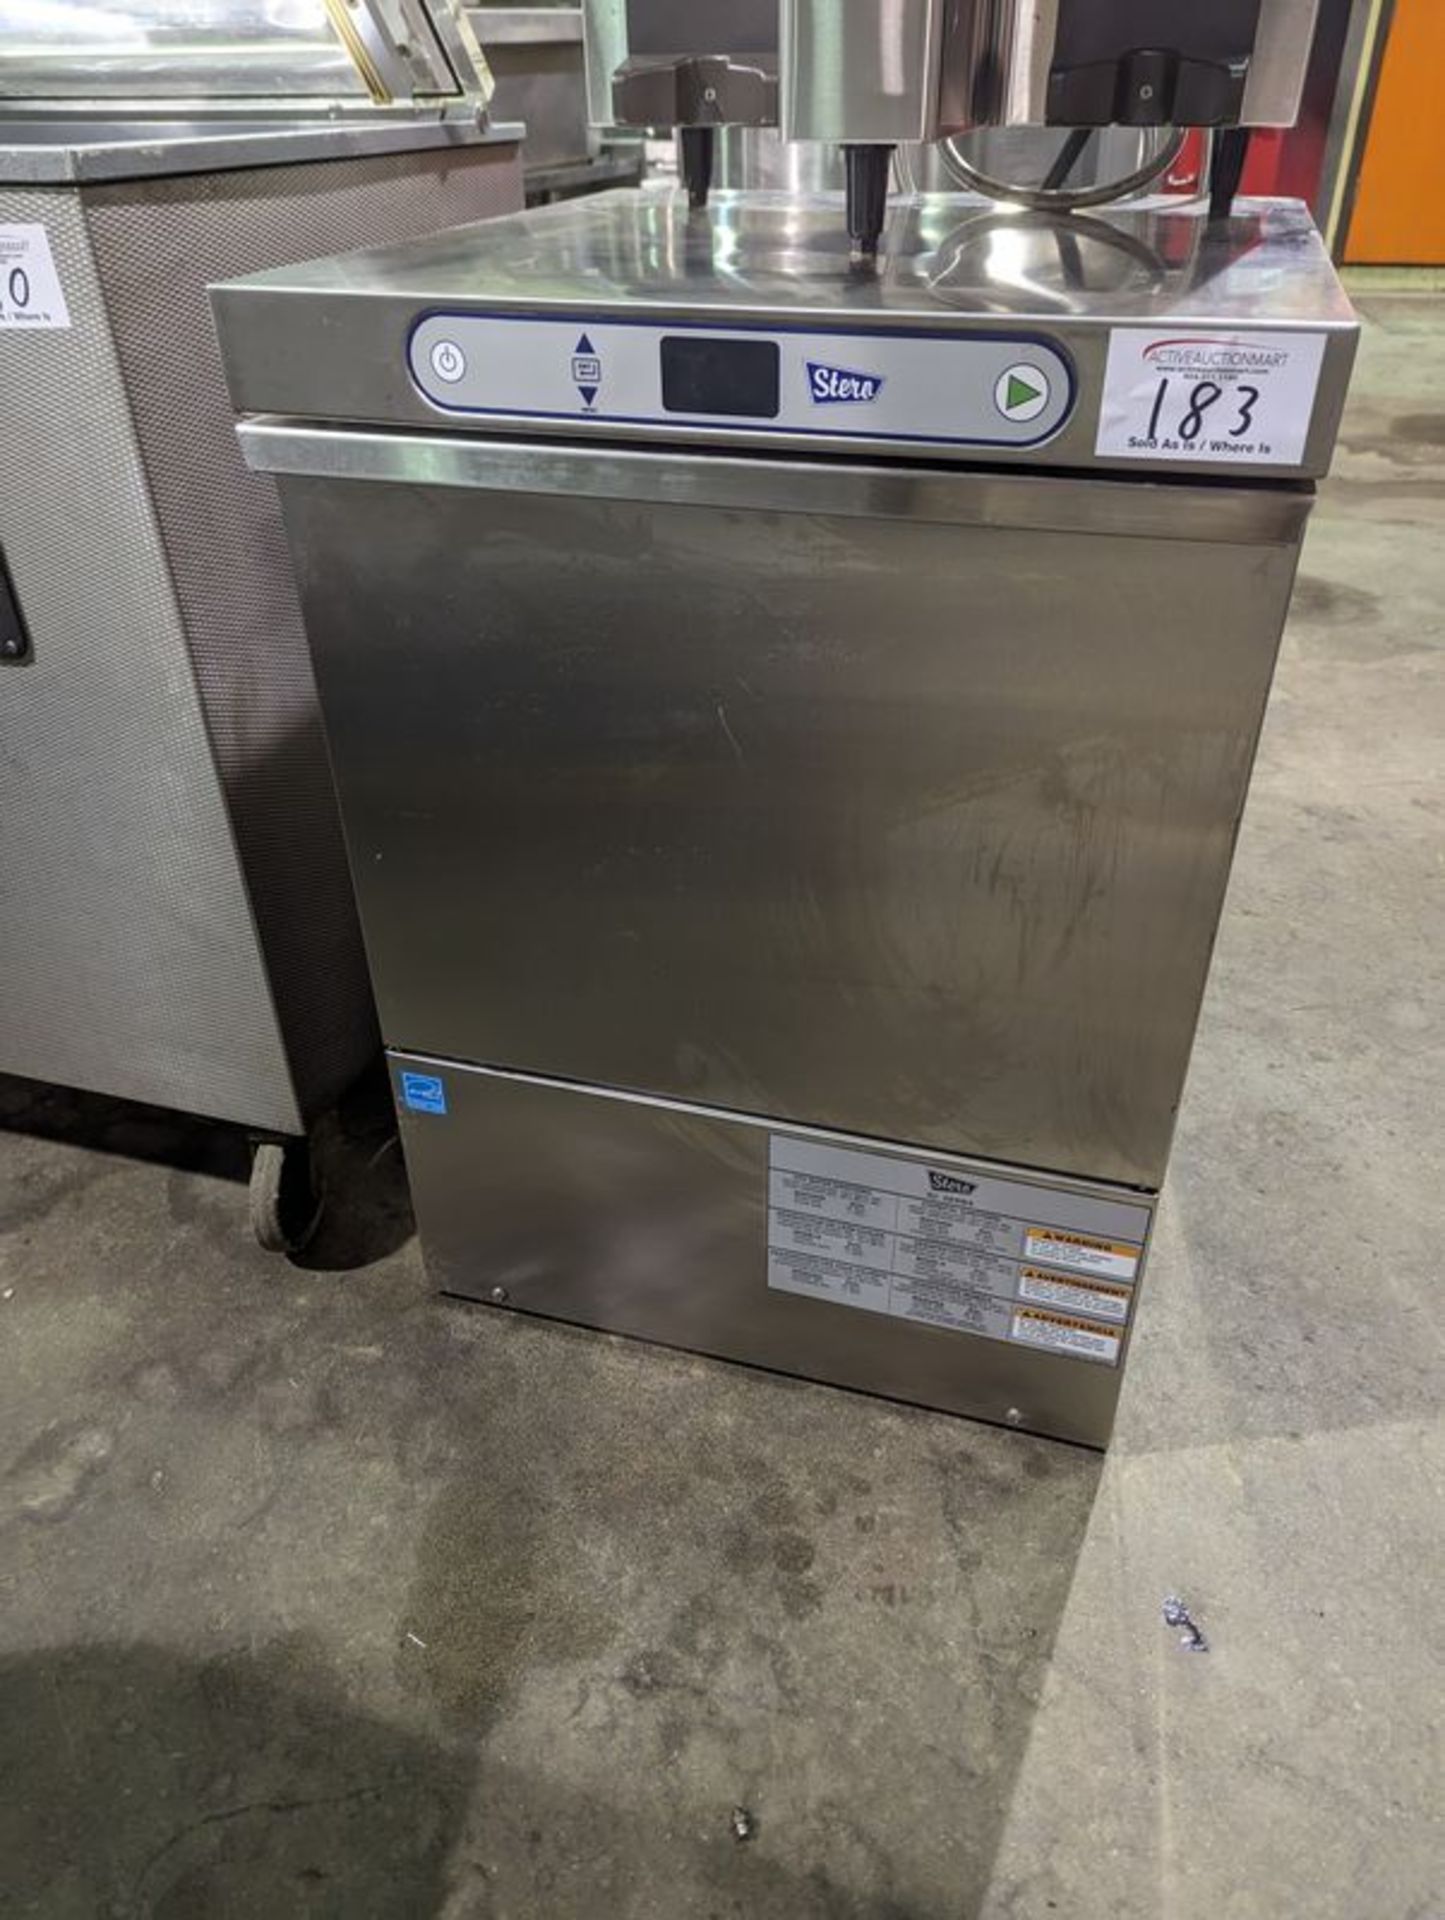 Stero SUH Under Counter, High Temp Dishwasher. Installed New in 2022, Never Used.